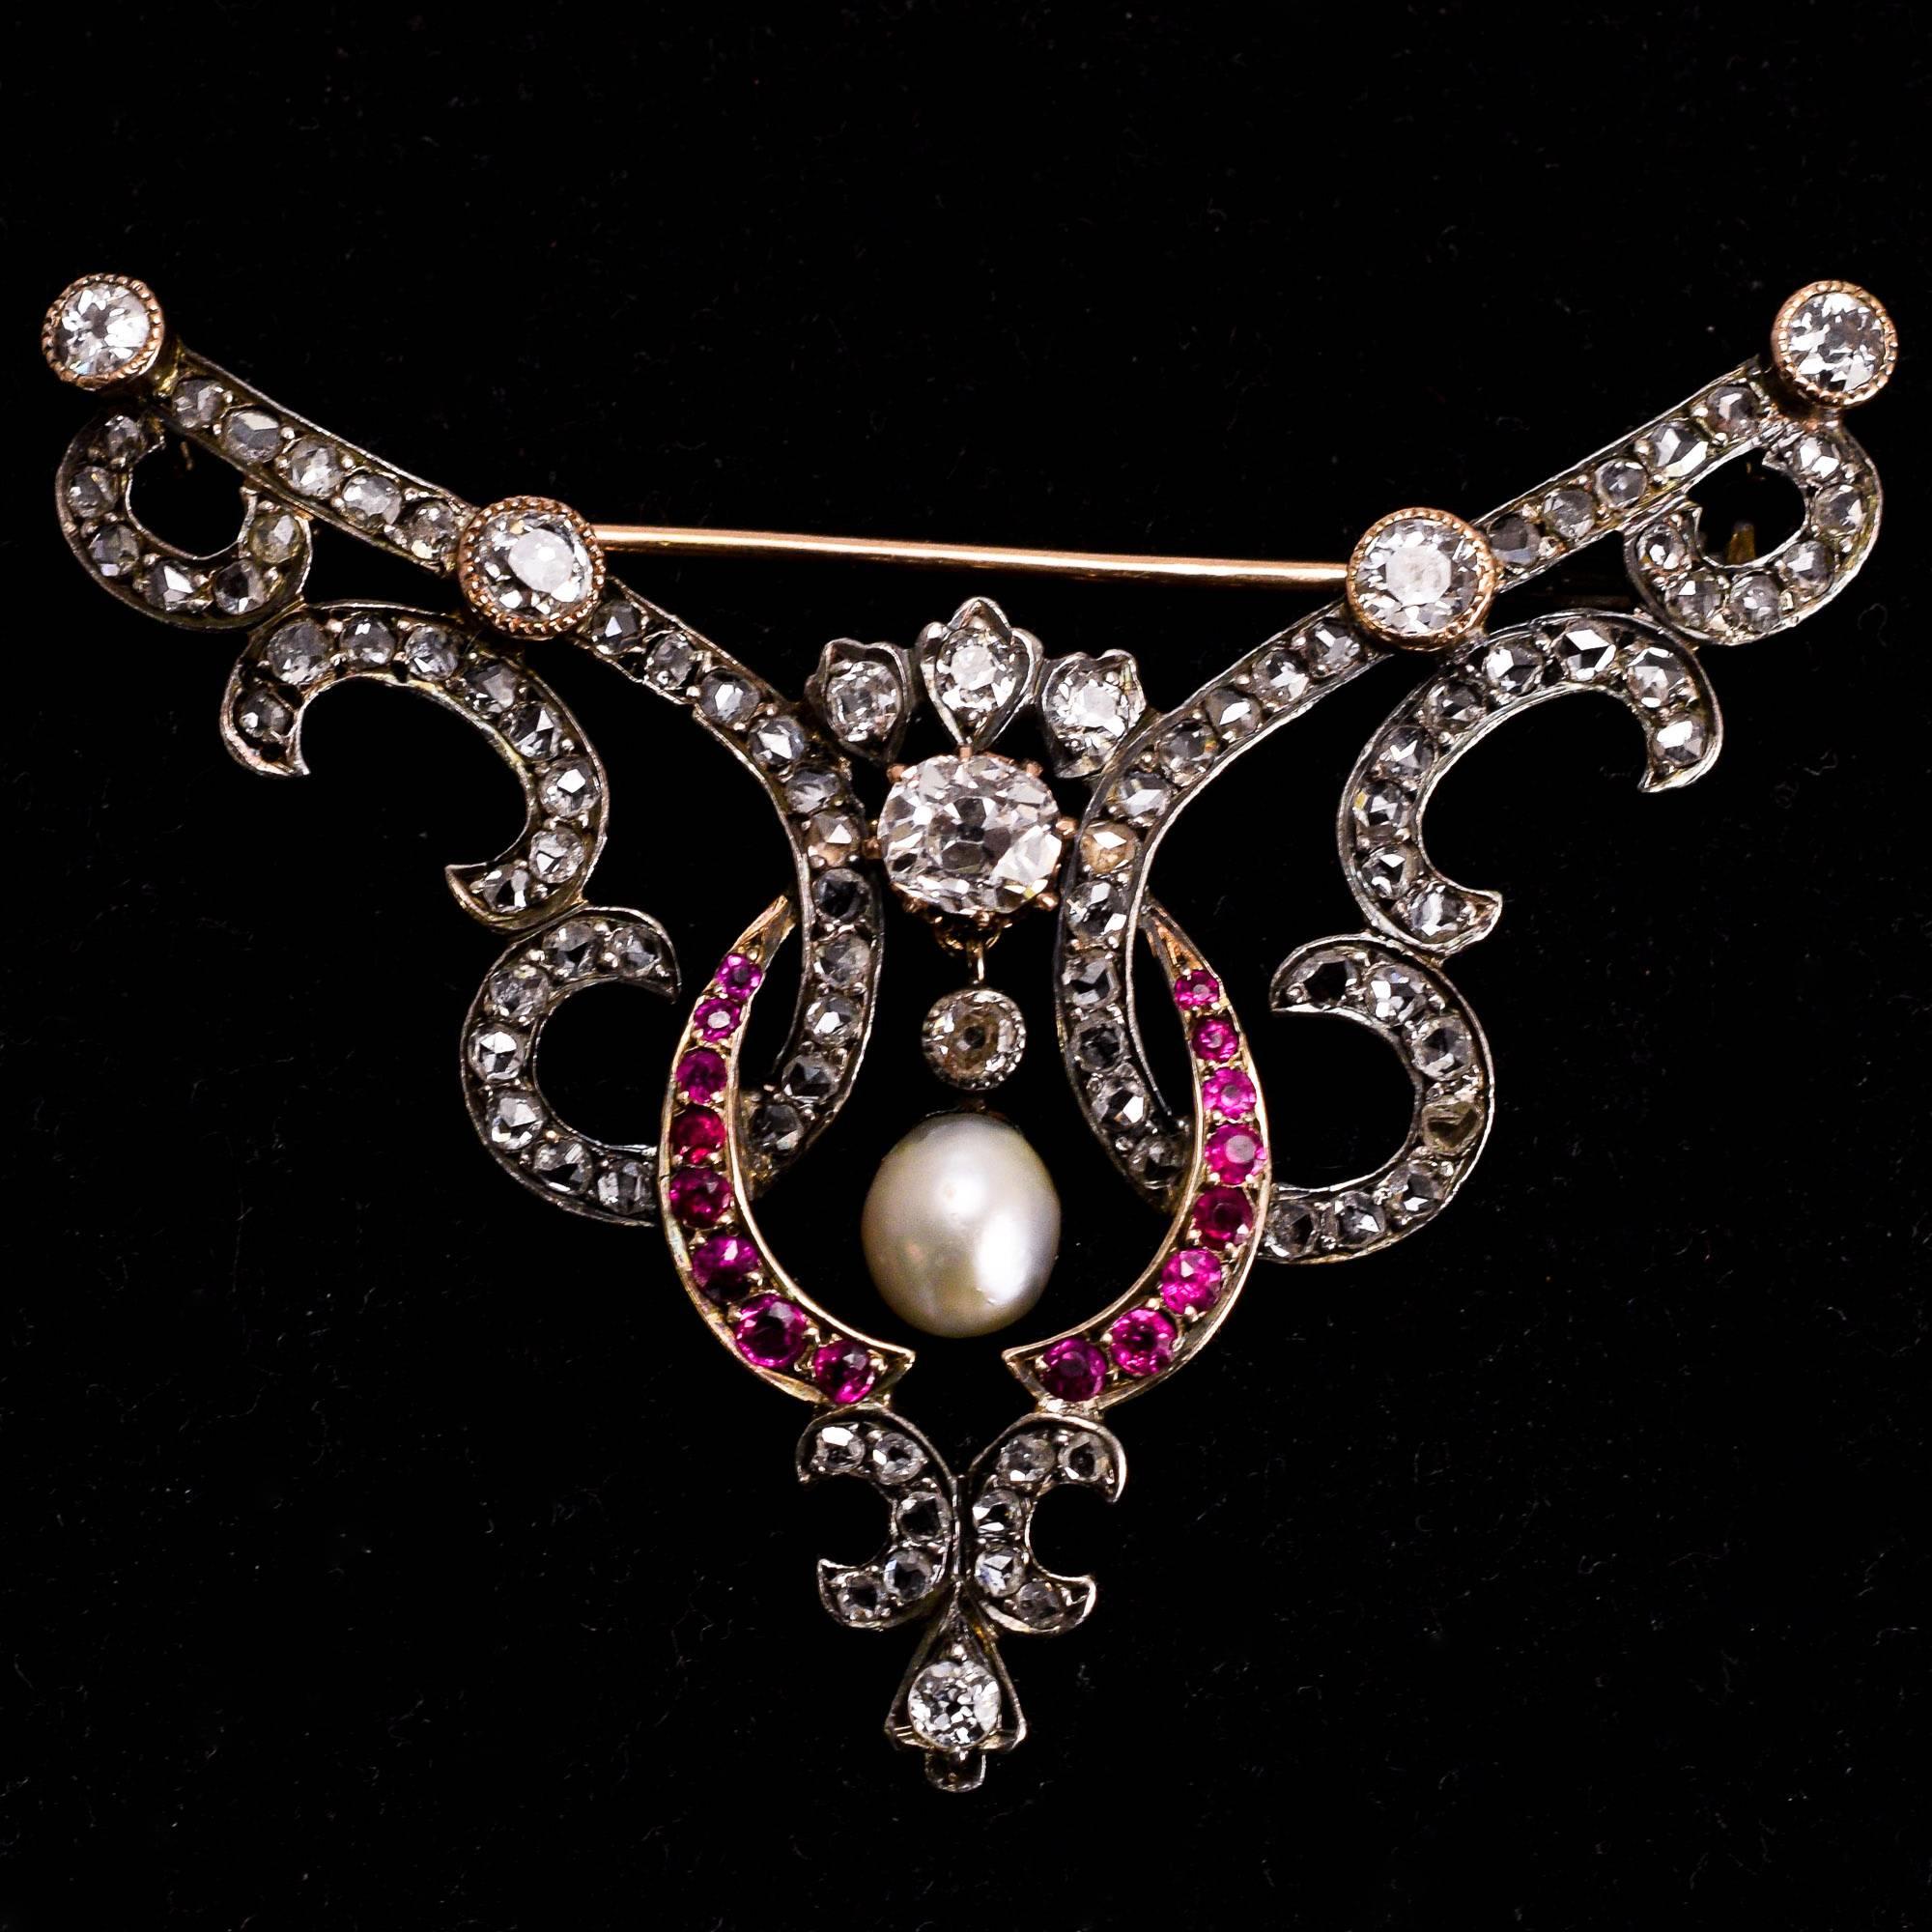 A glorious late Victorian brooch, set with diamonds, rubies, and an articulated natural pearl drop. It dates to c.1890, with graceful flowing curves, and an elegant form almost reminiscent of wings. The piece is set with around 2.8 carats of